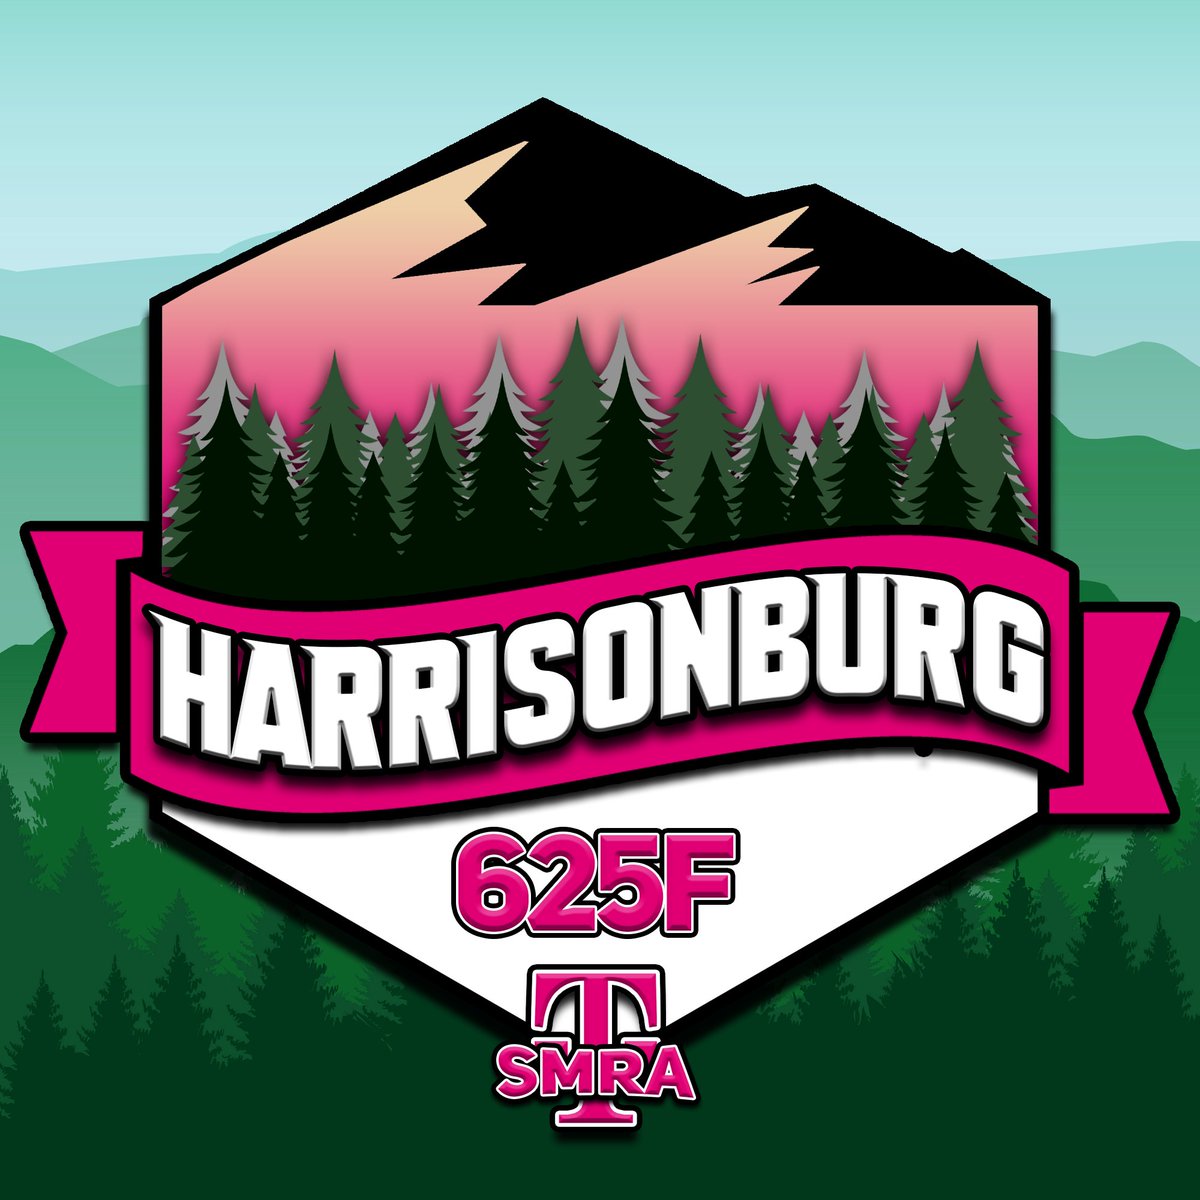 Need to thank these all-stars right here🌟🌟: @Tes_G1 , @perlacsantiago , @g_thalina have led Harrisonburg, with amazing success, all week and continue to develop into amazing leaders! Look out SMRA, #625F #HarrisonburgCrossing is back! #UnstoppableTogether #WeWontStop